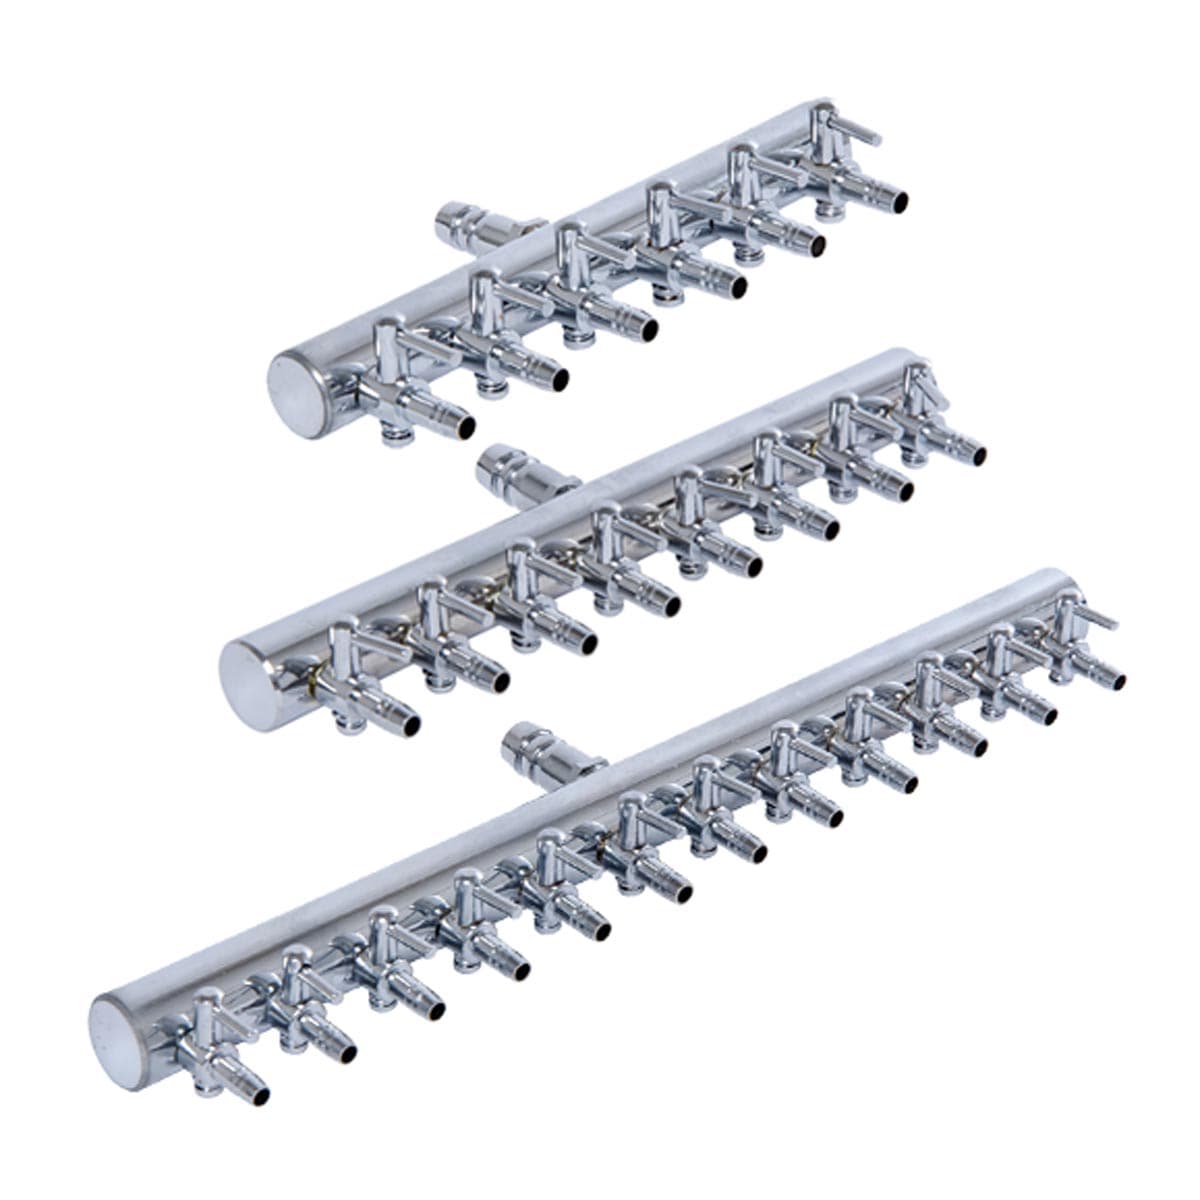 A set of three TAS Air Manifolds for aeration control, on a white background.